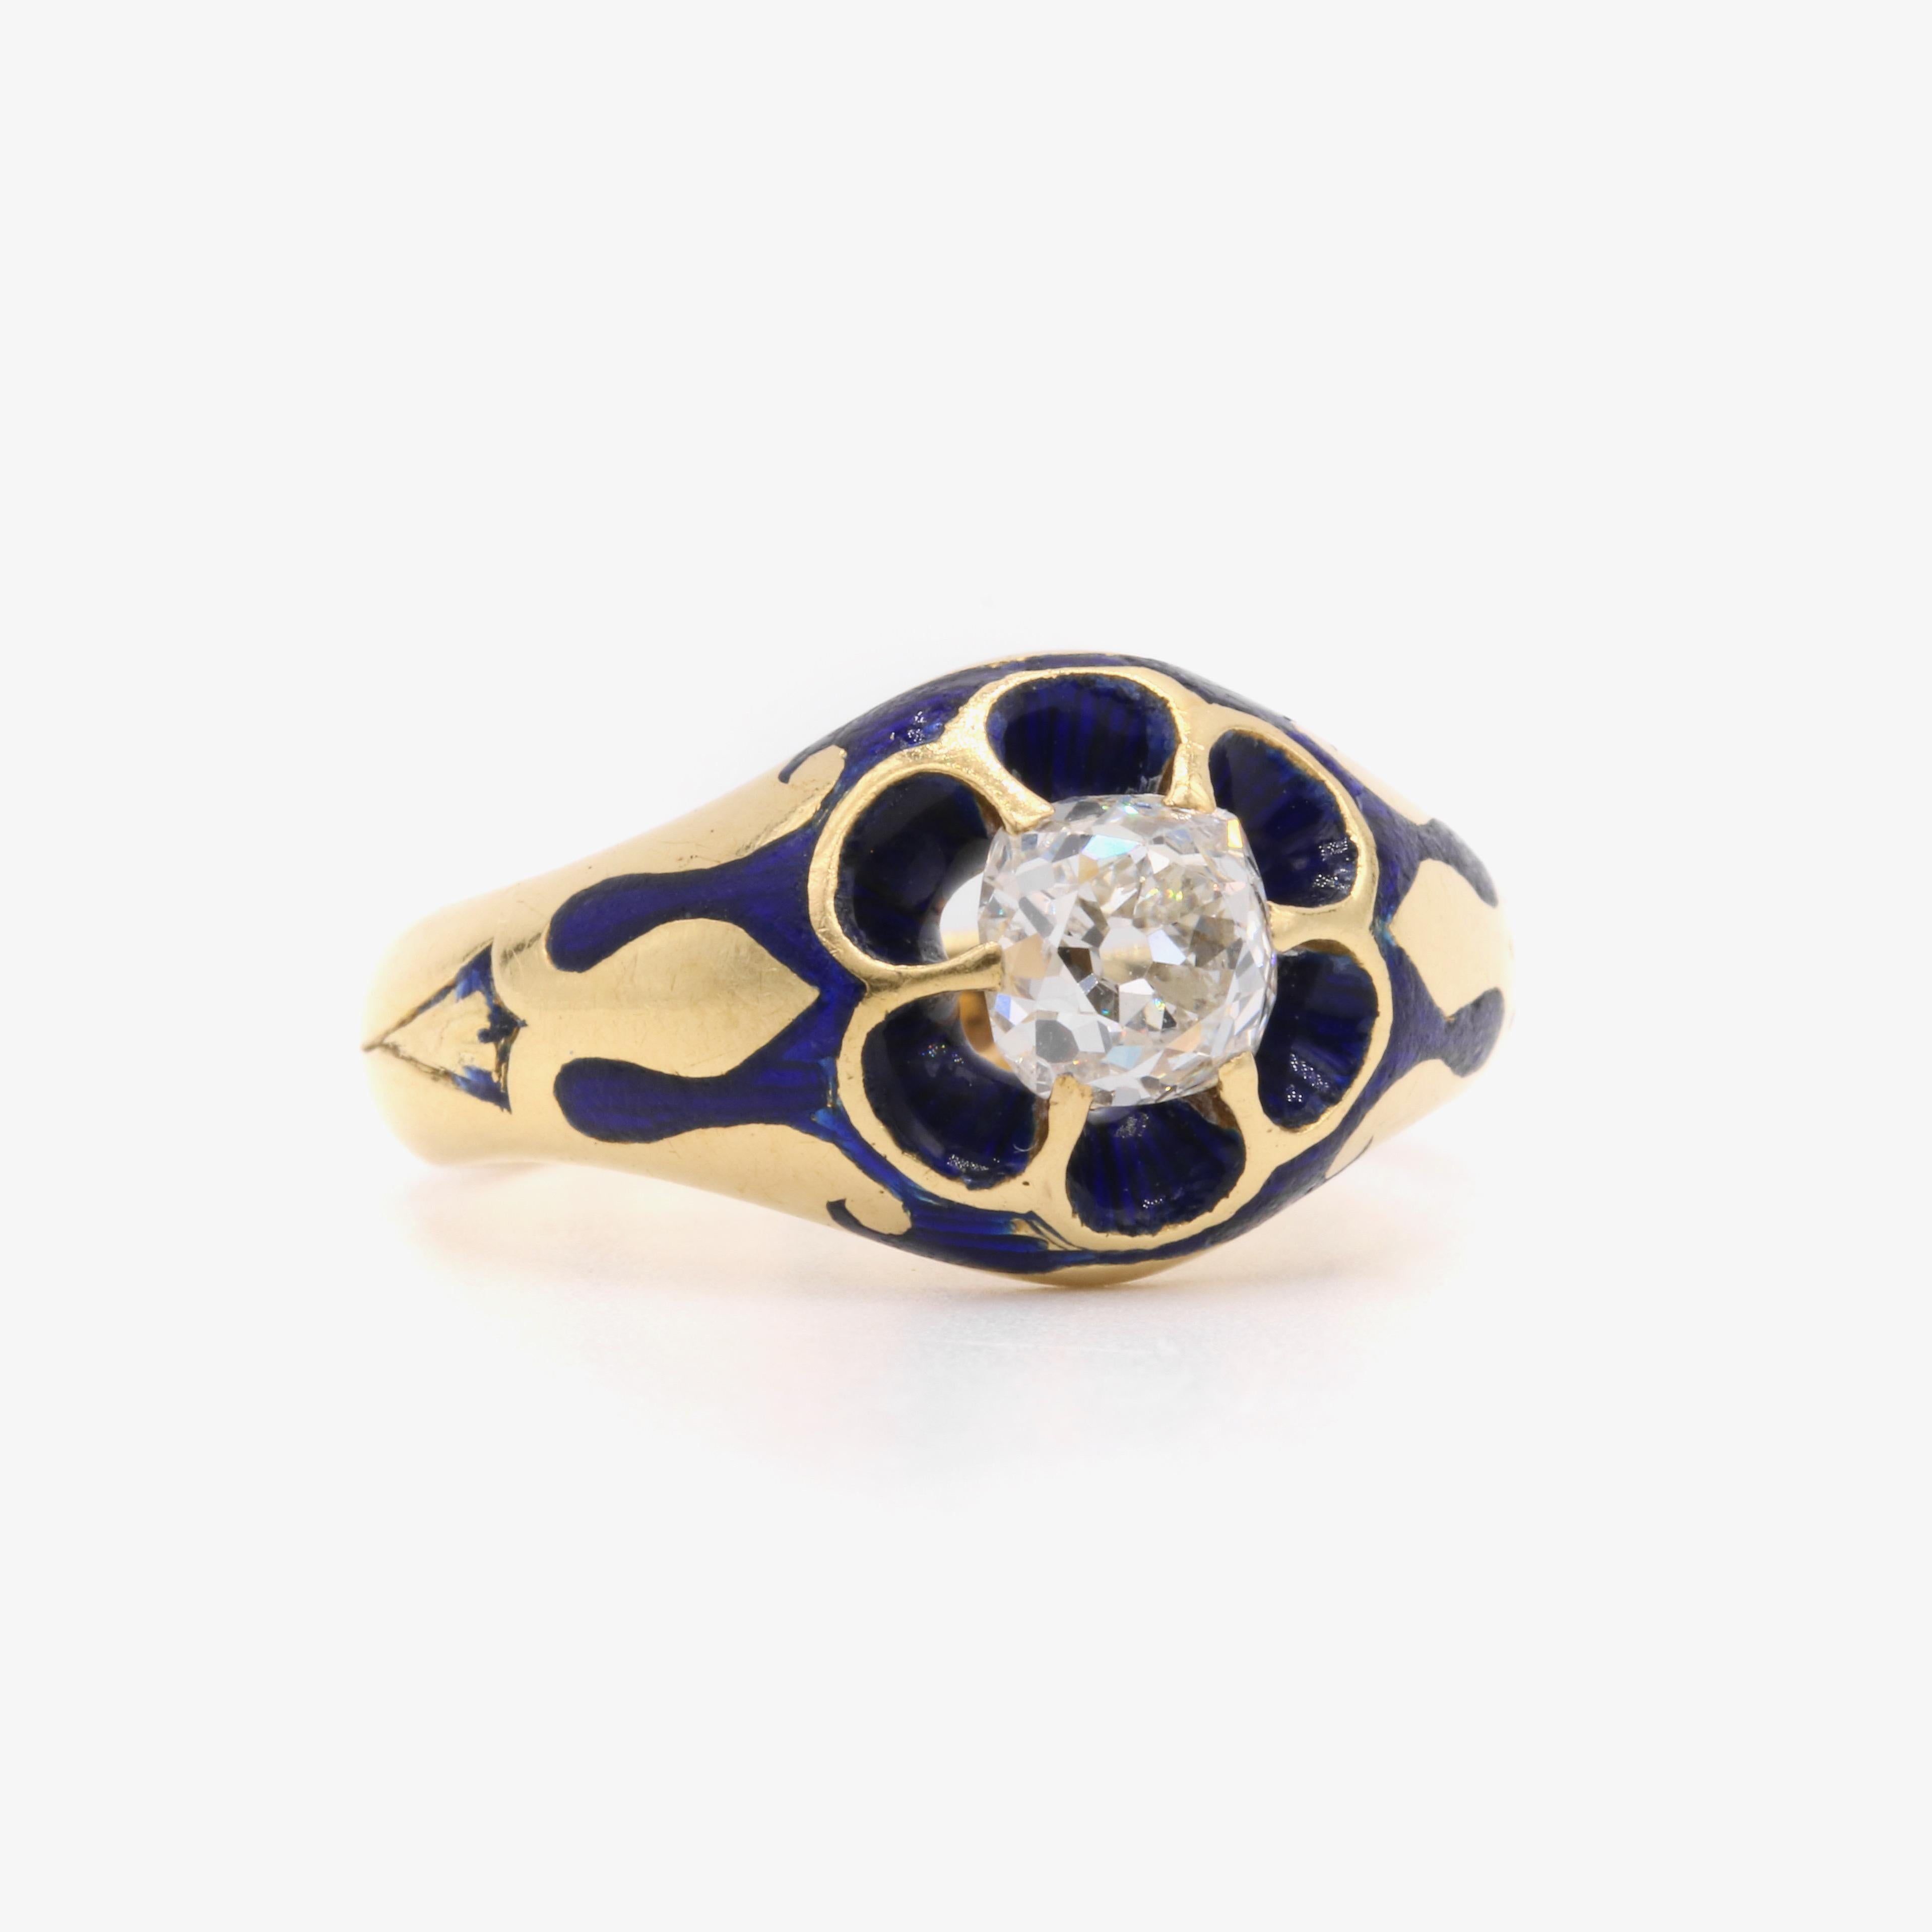 An antique yellow gold, enamel, and diamond ring, comprising one large old mine cut diamond and blue enamel decoration, set in 18 karat yellow gold, to a band of 18 karat yellow gold.

This striking ring is unlike any other ring I have come across,